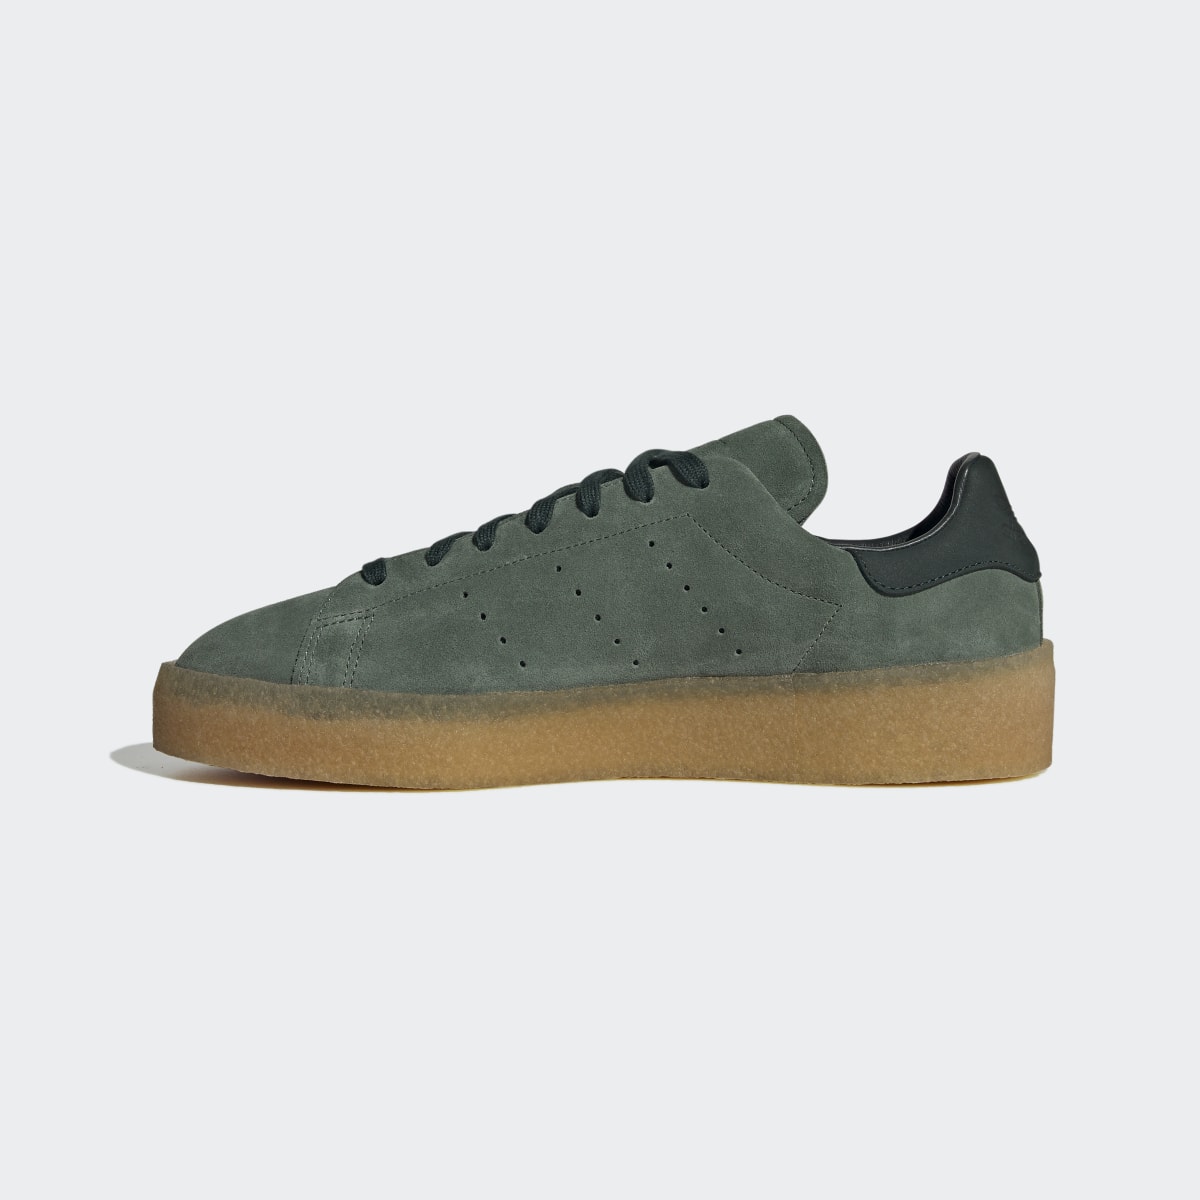 Adidas Stan Smith Crepe Shoes. 7